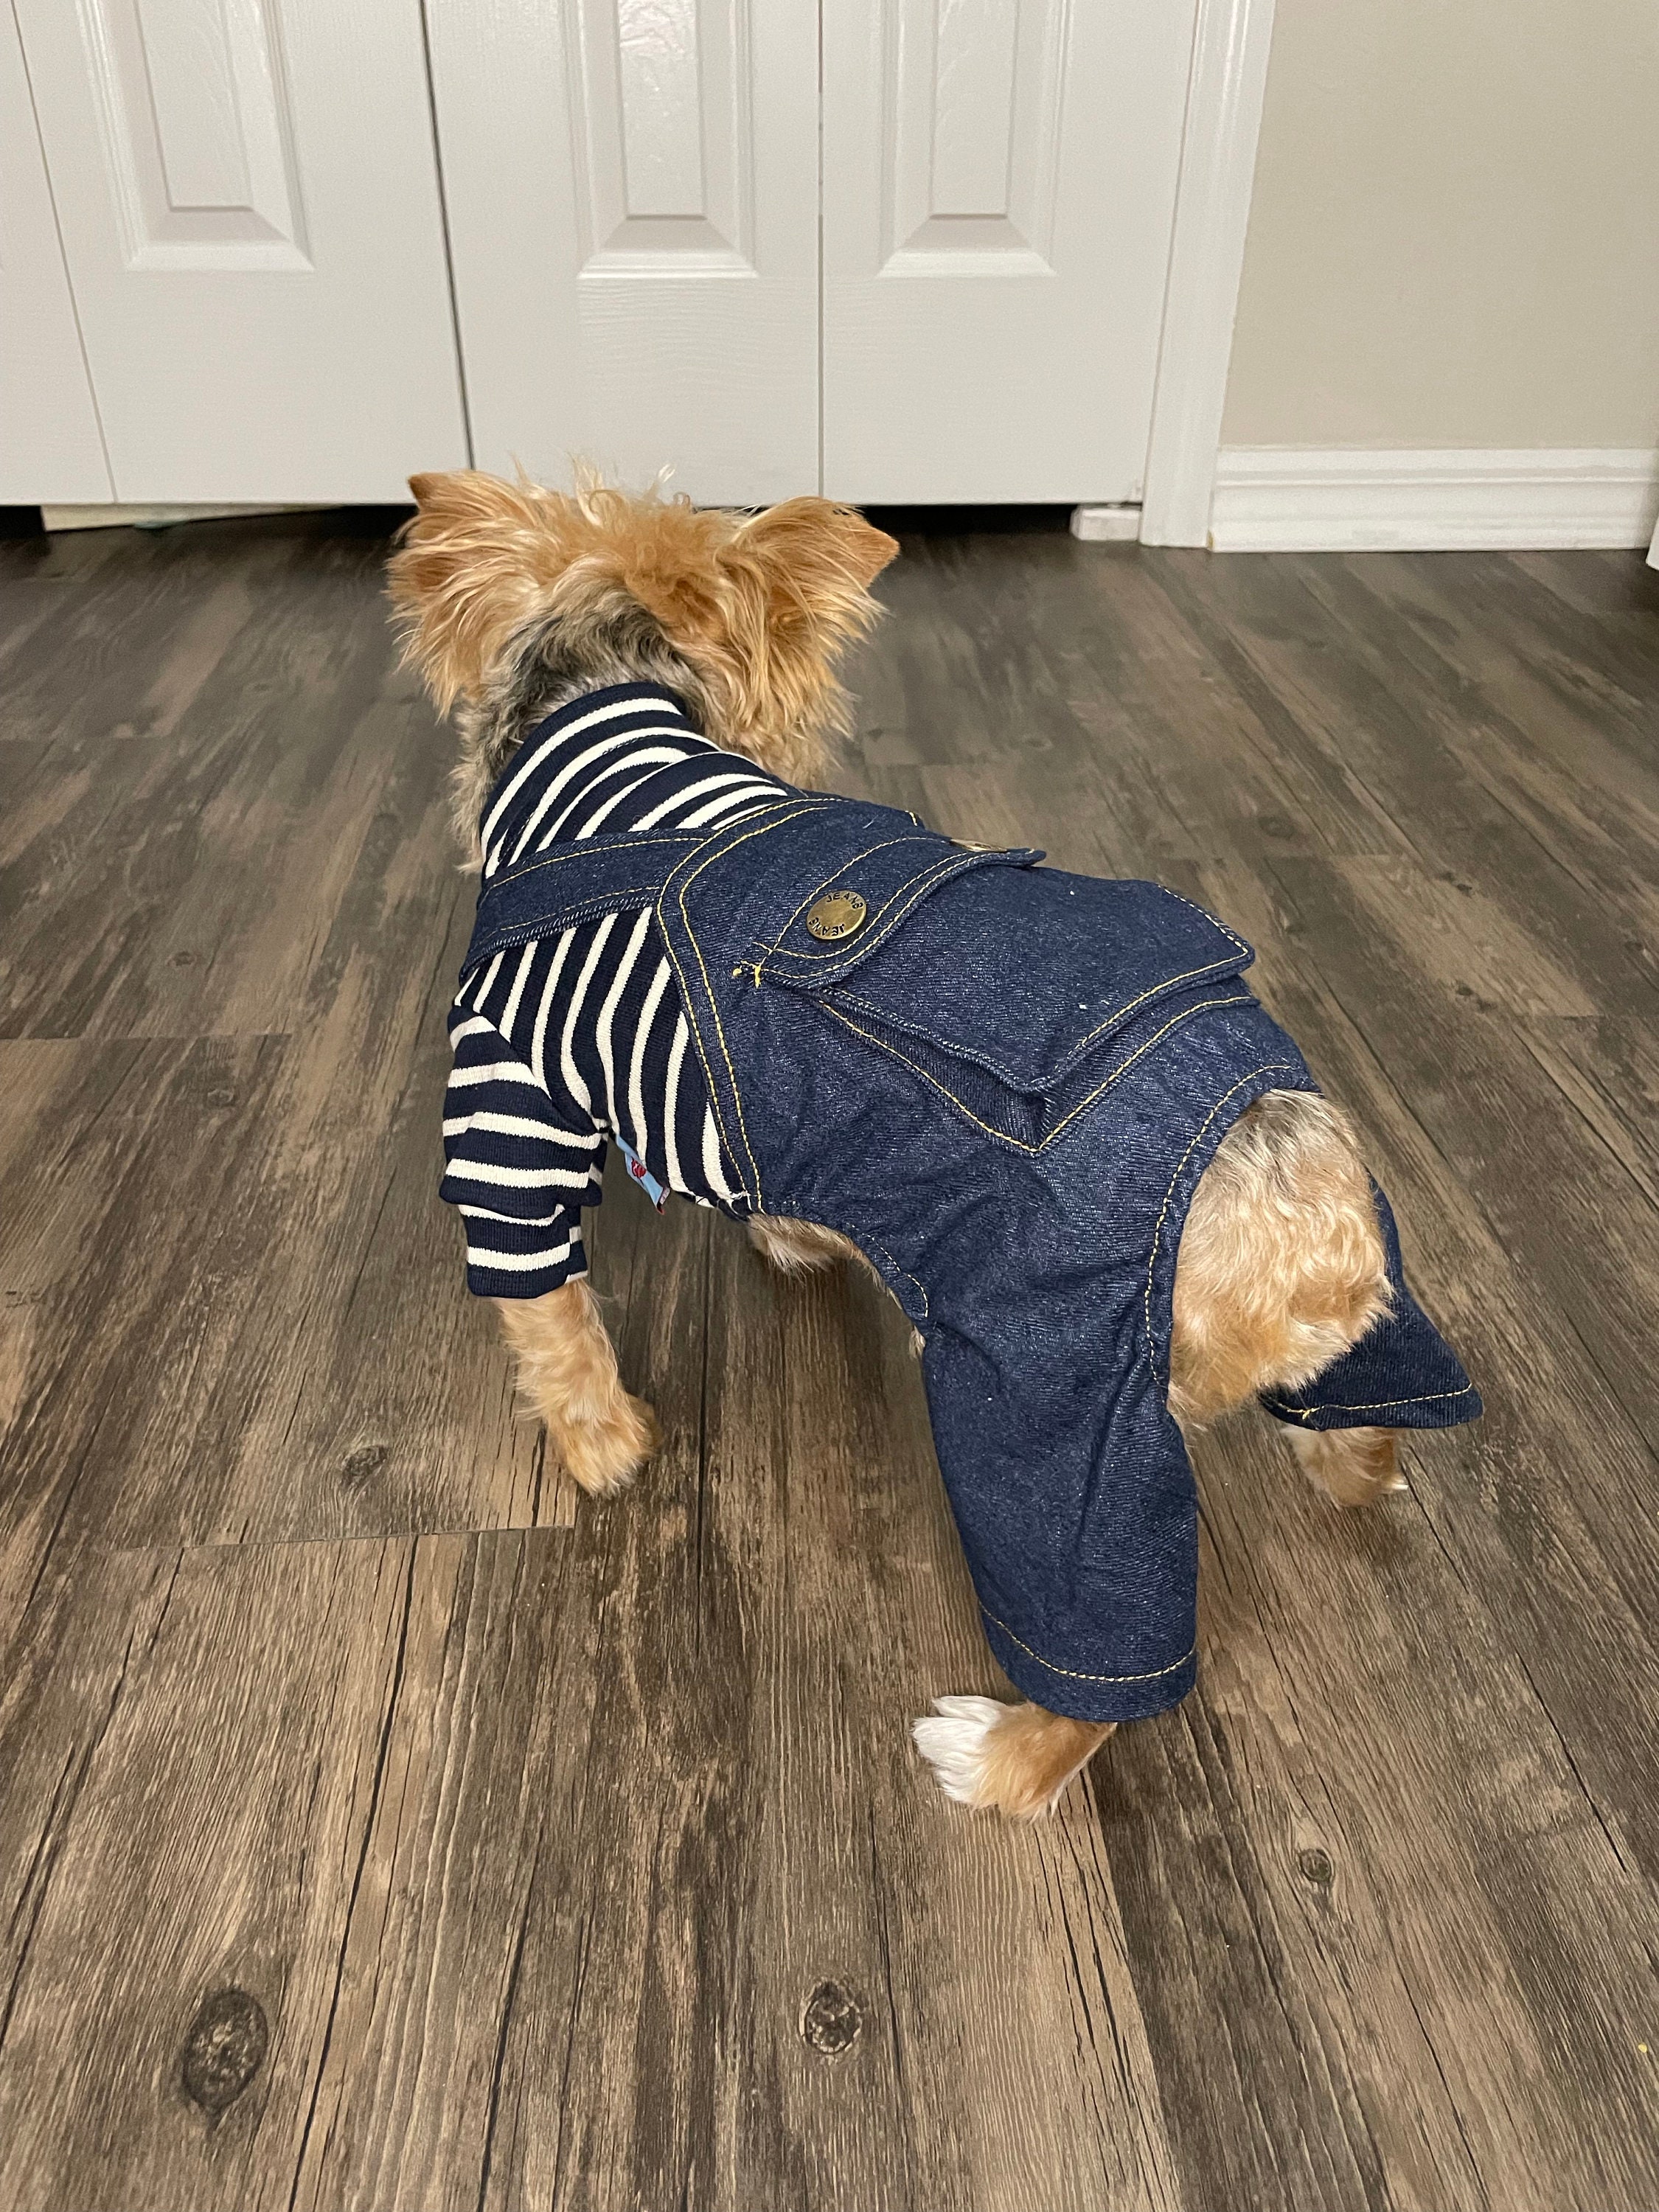  PAIDEFUL Dog Outfits for Small Dogs Boy Girls Summer Shirts  with Plaid Pants Jumpsuits One Piece Apparel for Cats Puppies Chihuahua  Clothes Adorable Overalls for Medium Pets 4 Legs Spring 